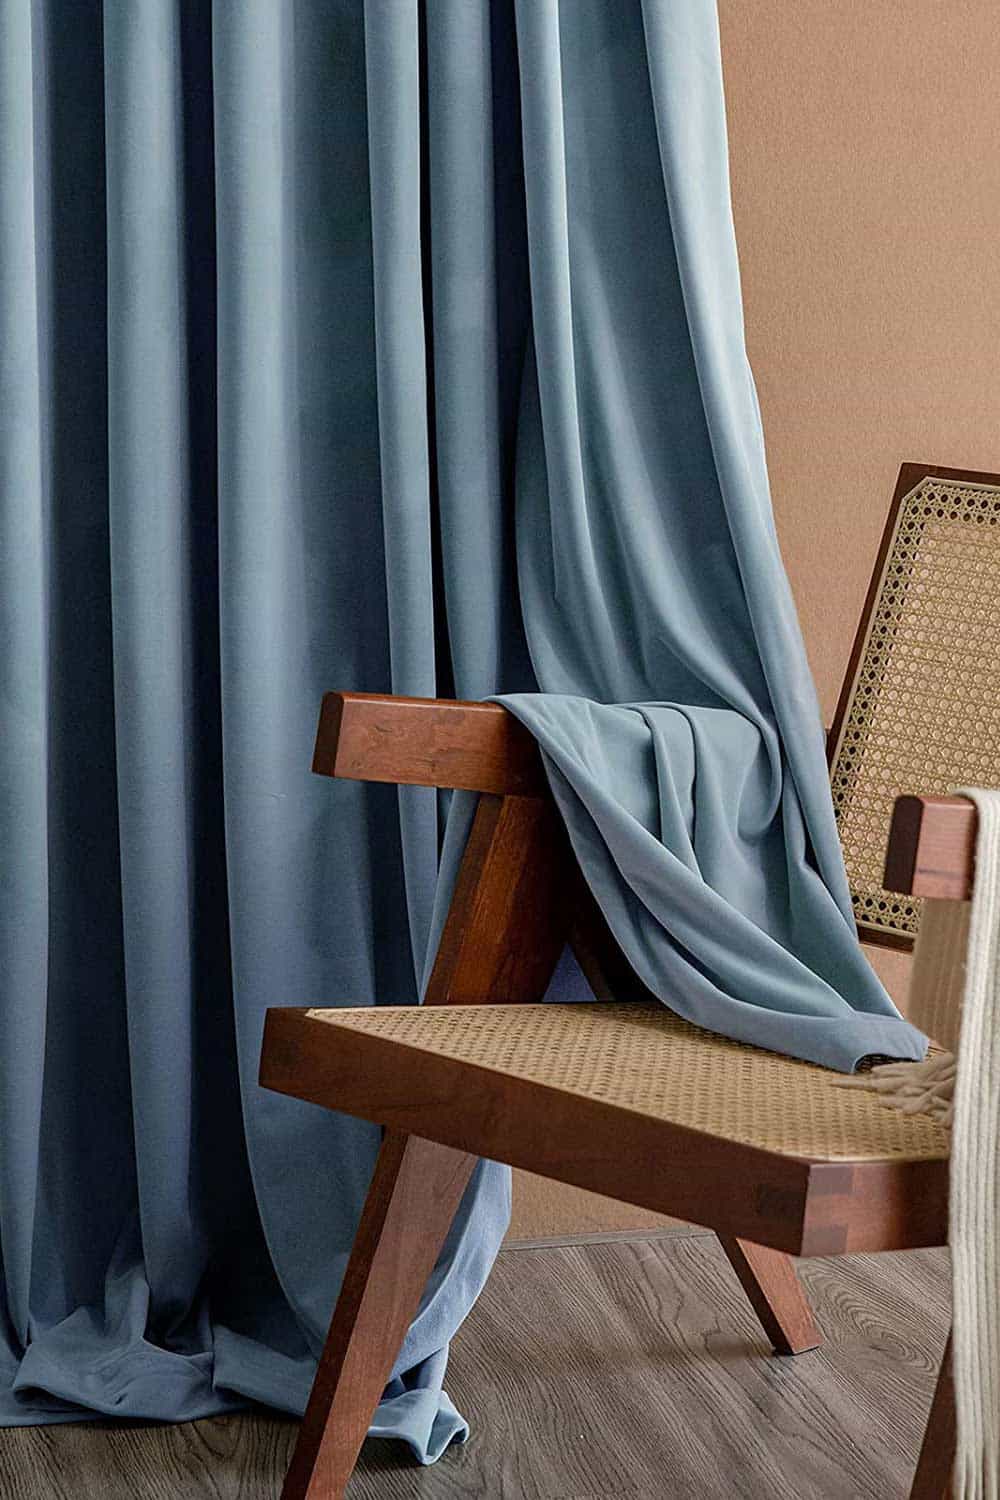 Where to buy cheap curtains that look expensive